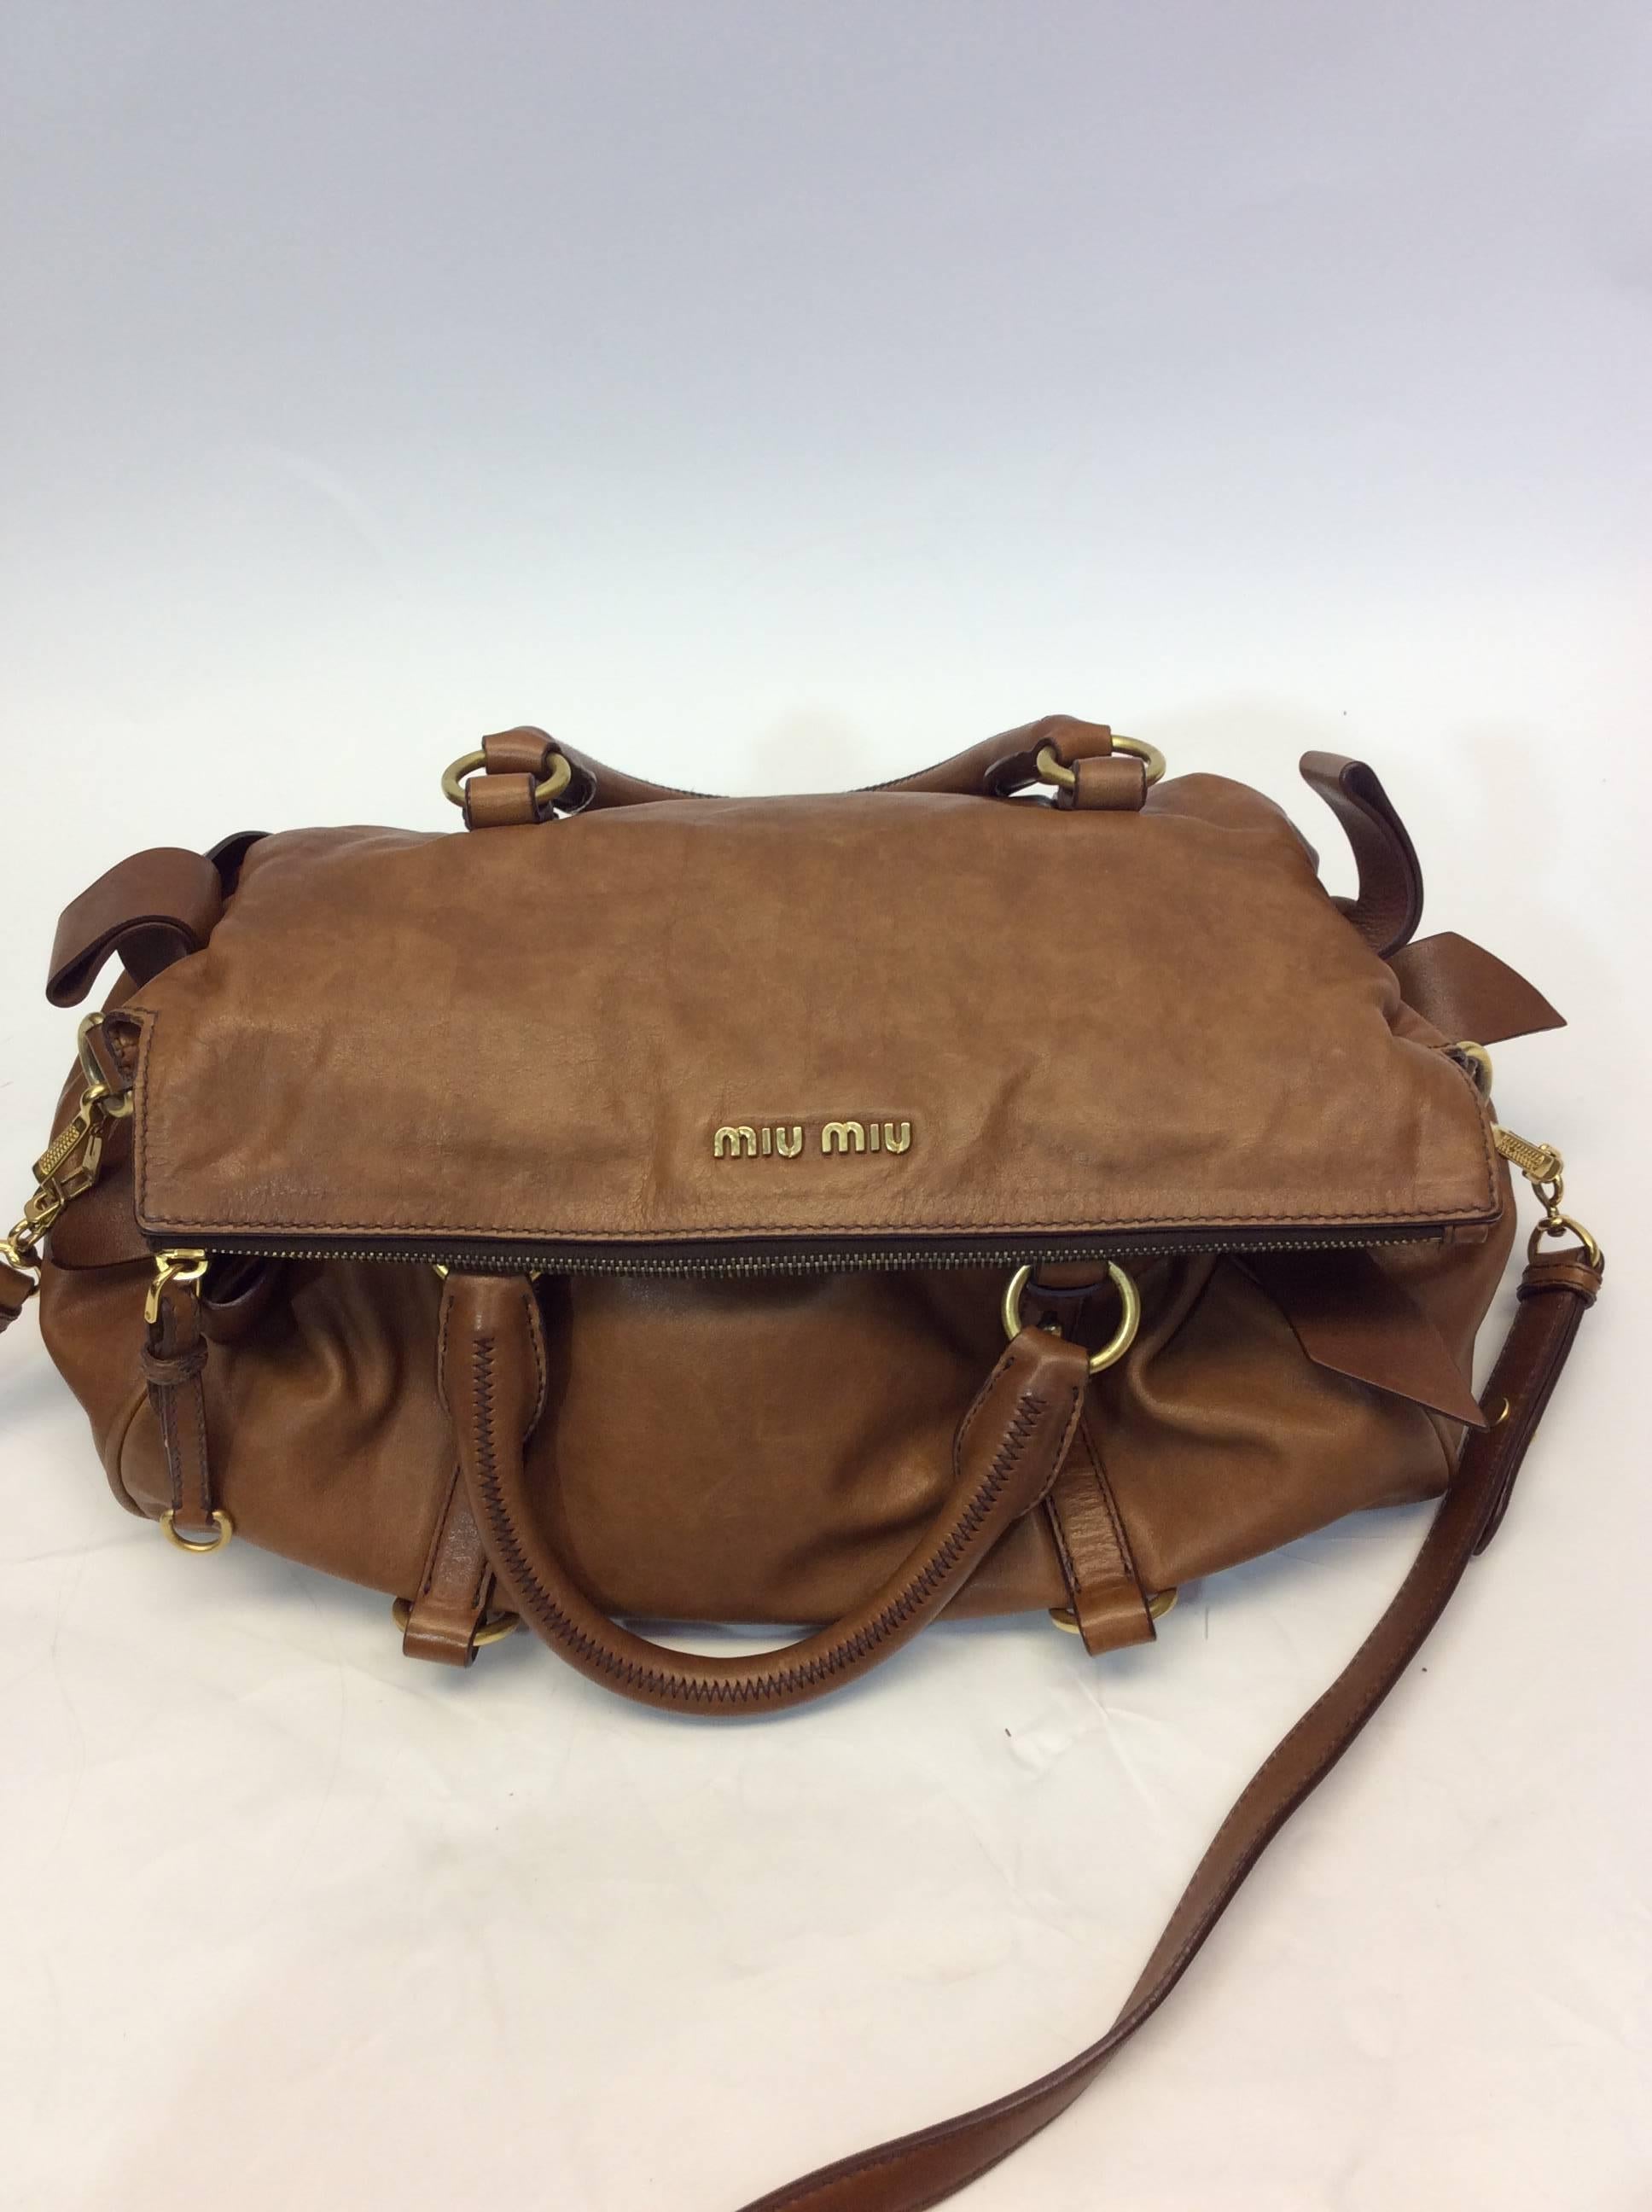 Brown Vitello Lux Bow Bag
14.5 inches wide, 10 inches tall, 7.5 inches deep
3 inch strap drop with 40 inch removable crossbody strap
Bow details on bag sides
Top zipper closure
Includes one interior zipped pocket
Leather exterior, cloth lining